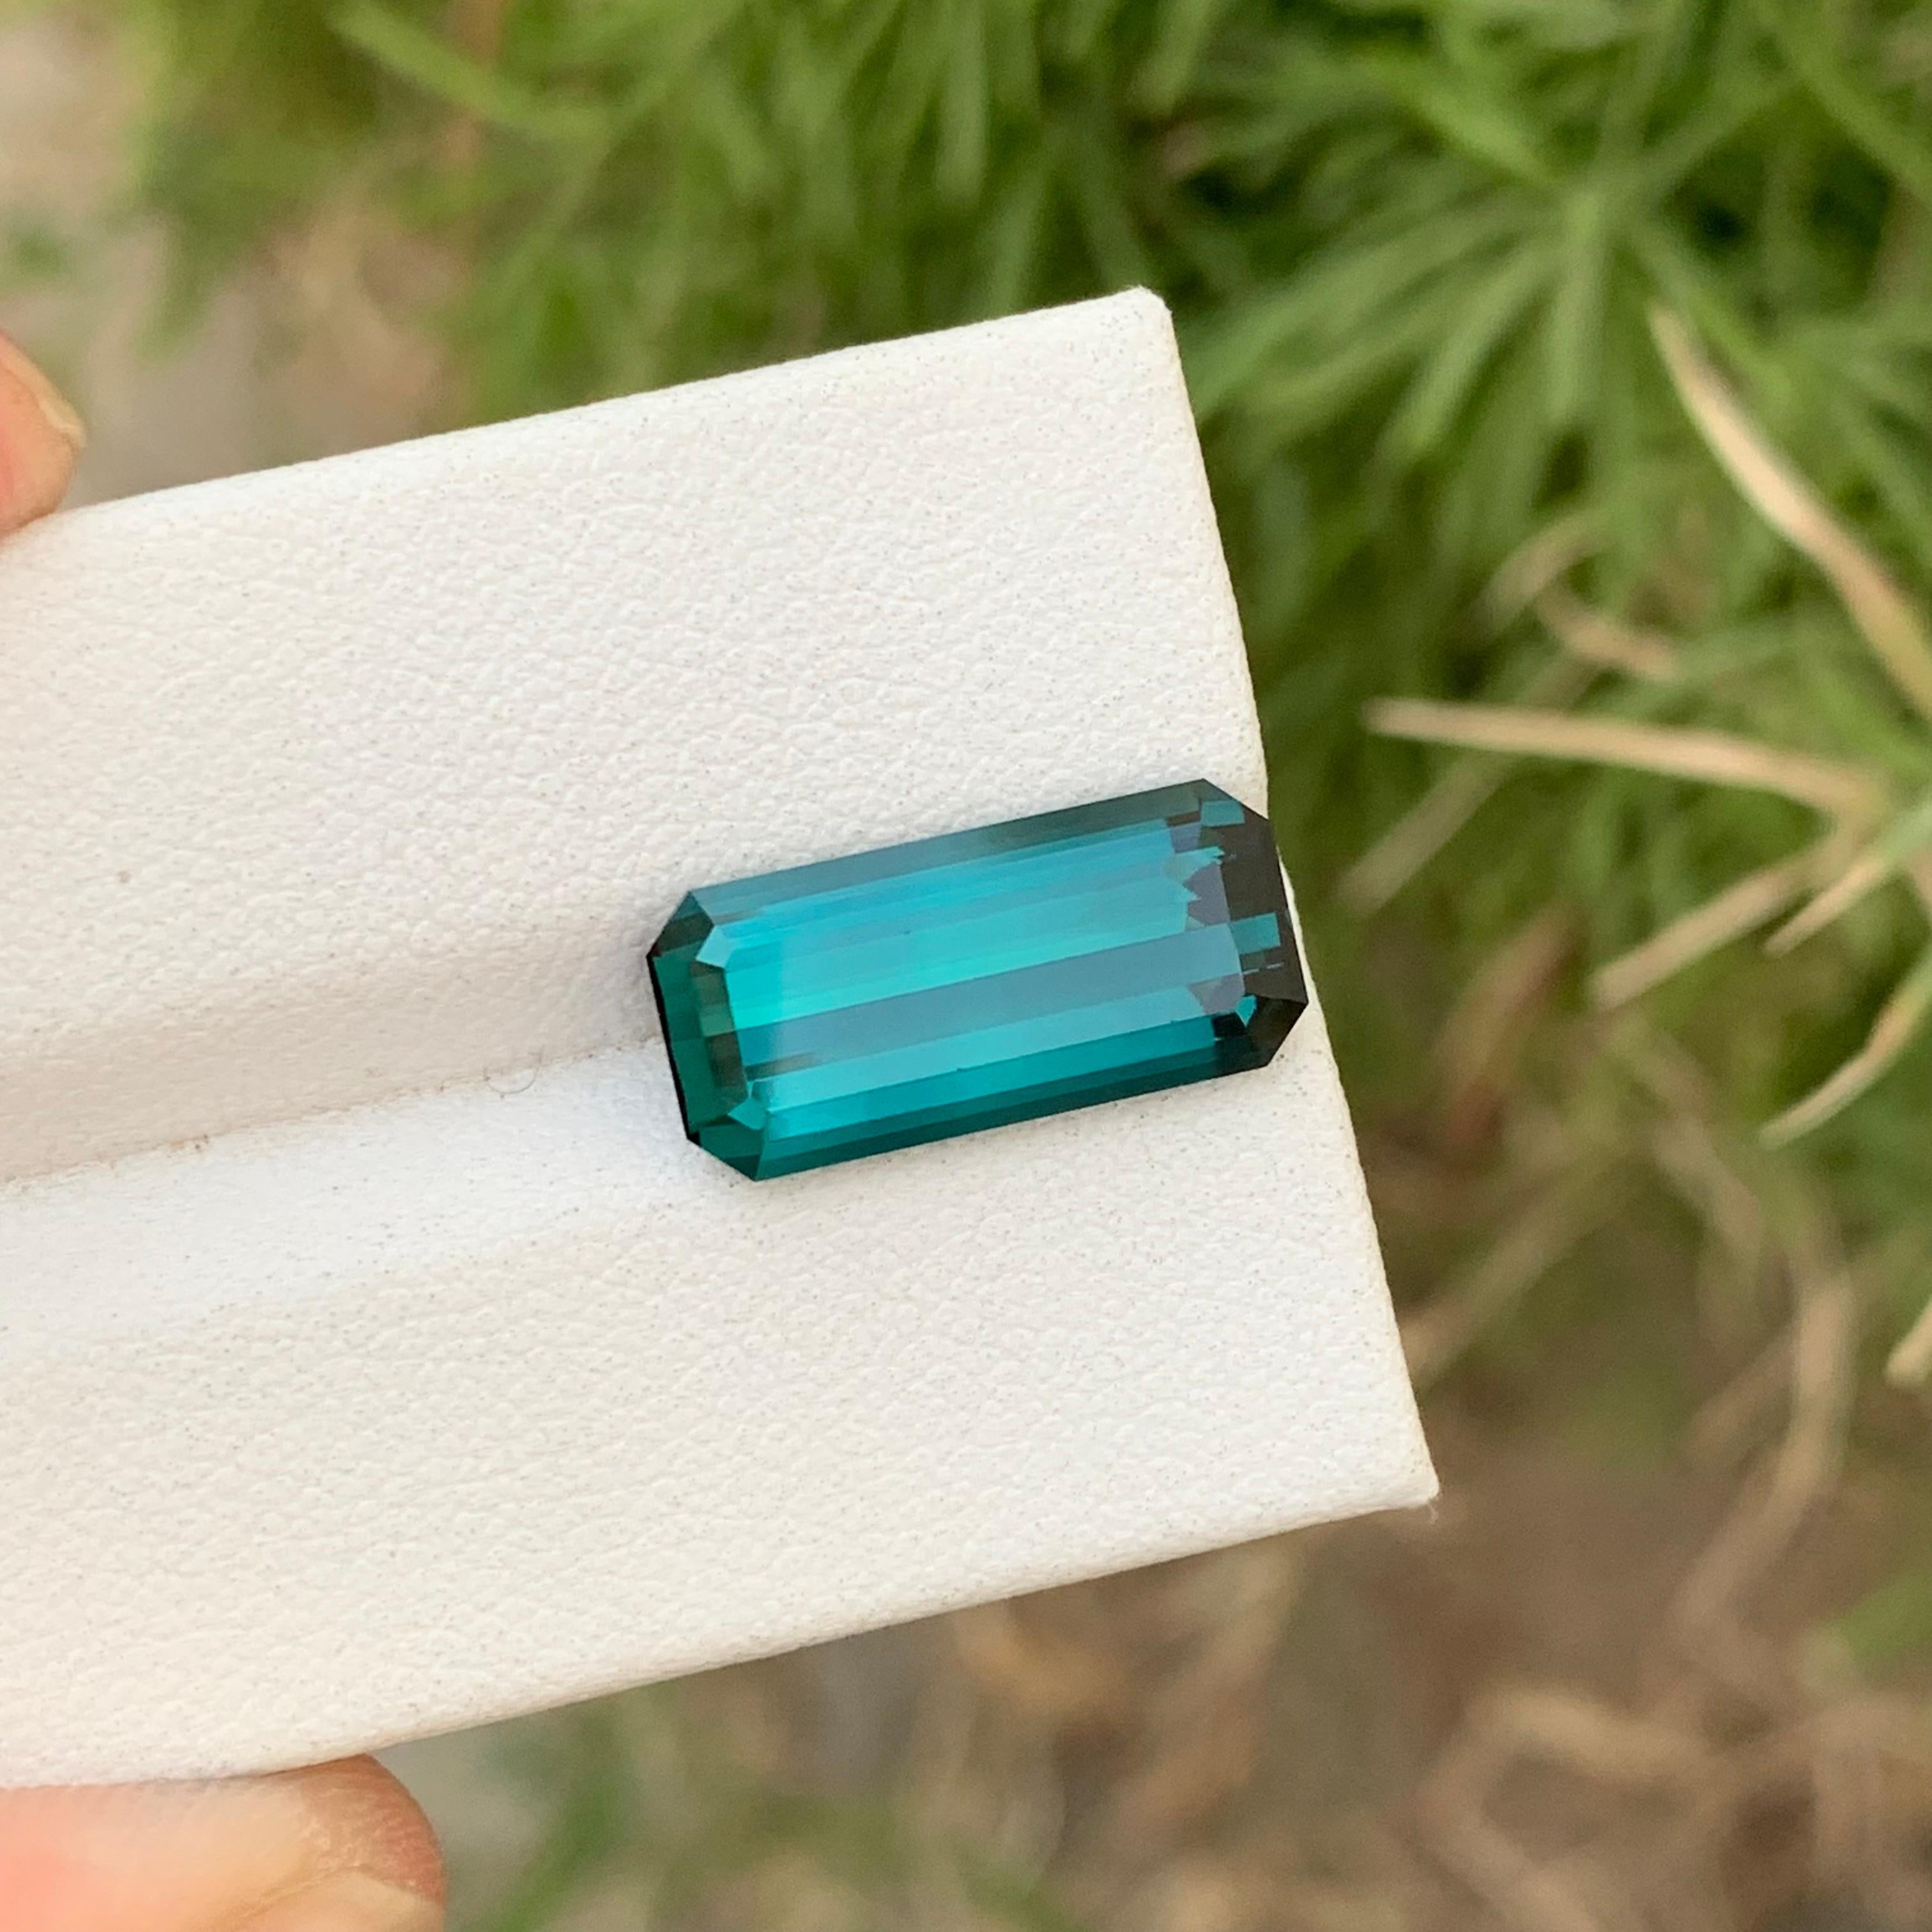 Natural Loose Indicolite Tourmaline 6.10 Carats Emerald Shape For Jewelry Making For Sale 10